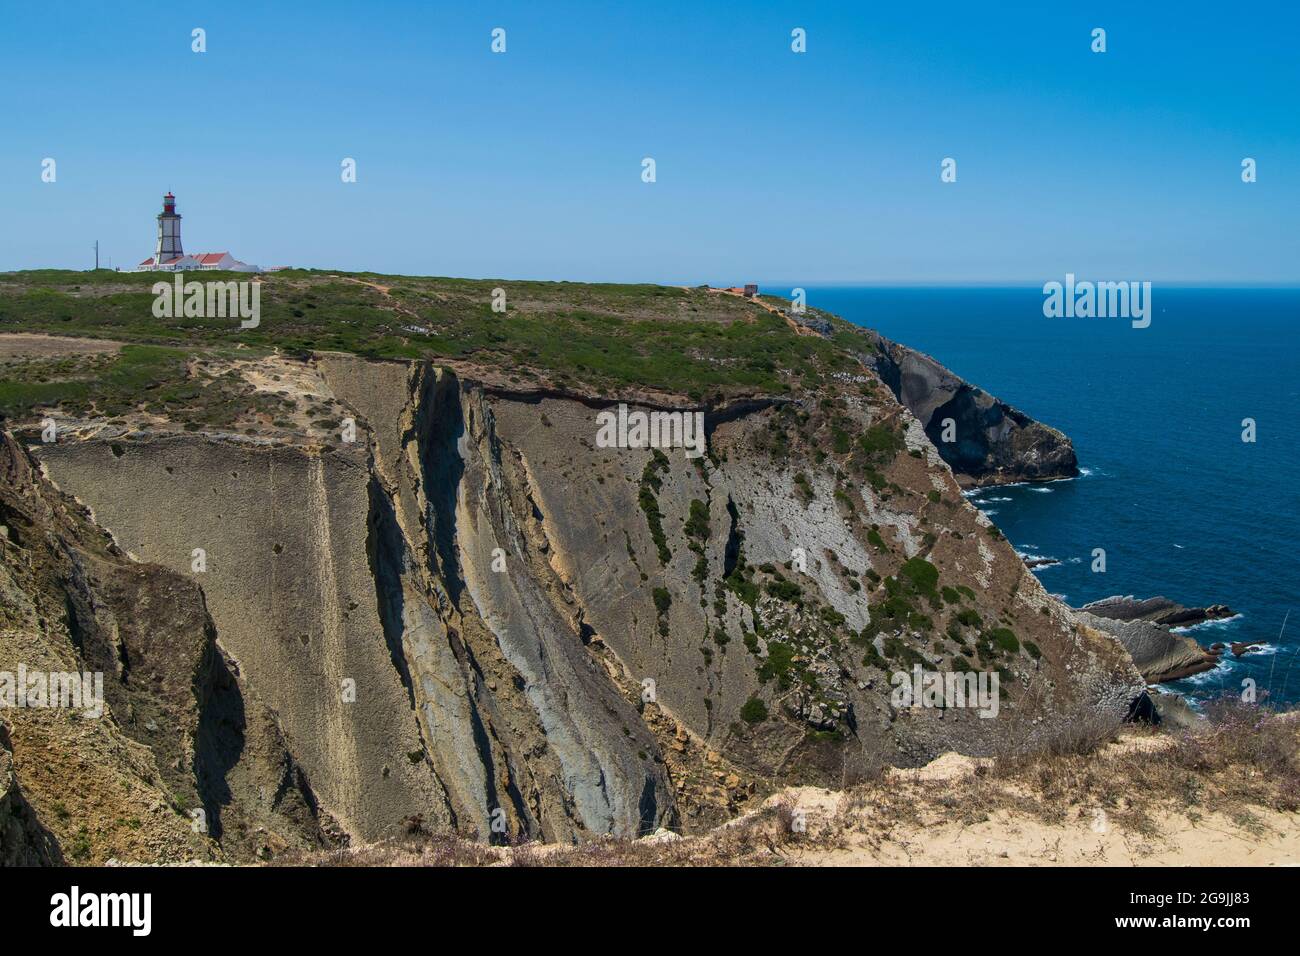 Cabo Espichel is a cape situated on the western coast of the civil parish of Castelo, municipality of Sesimbra, in the Portuguese district of Setúbal. Stock Photo